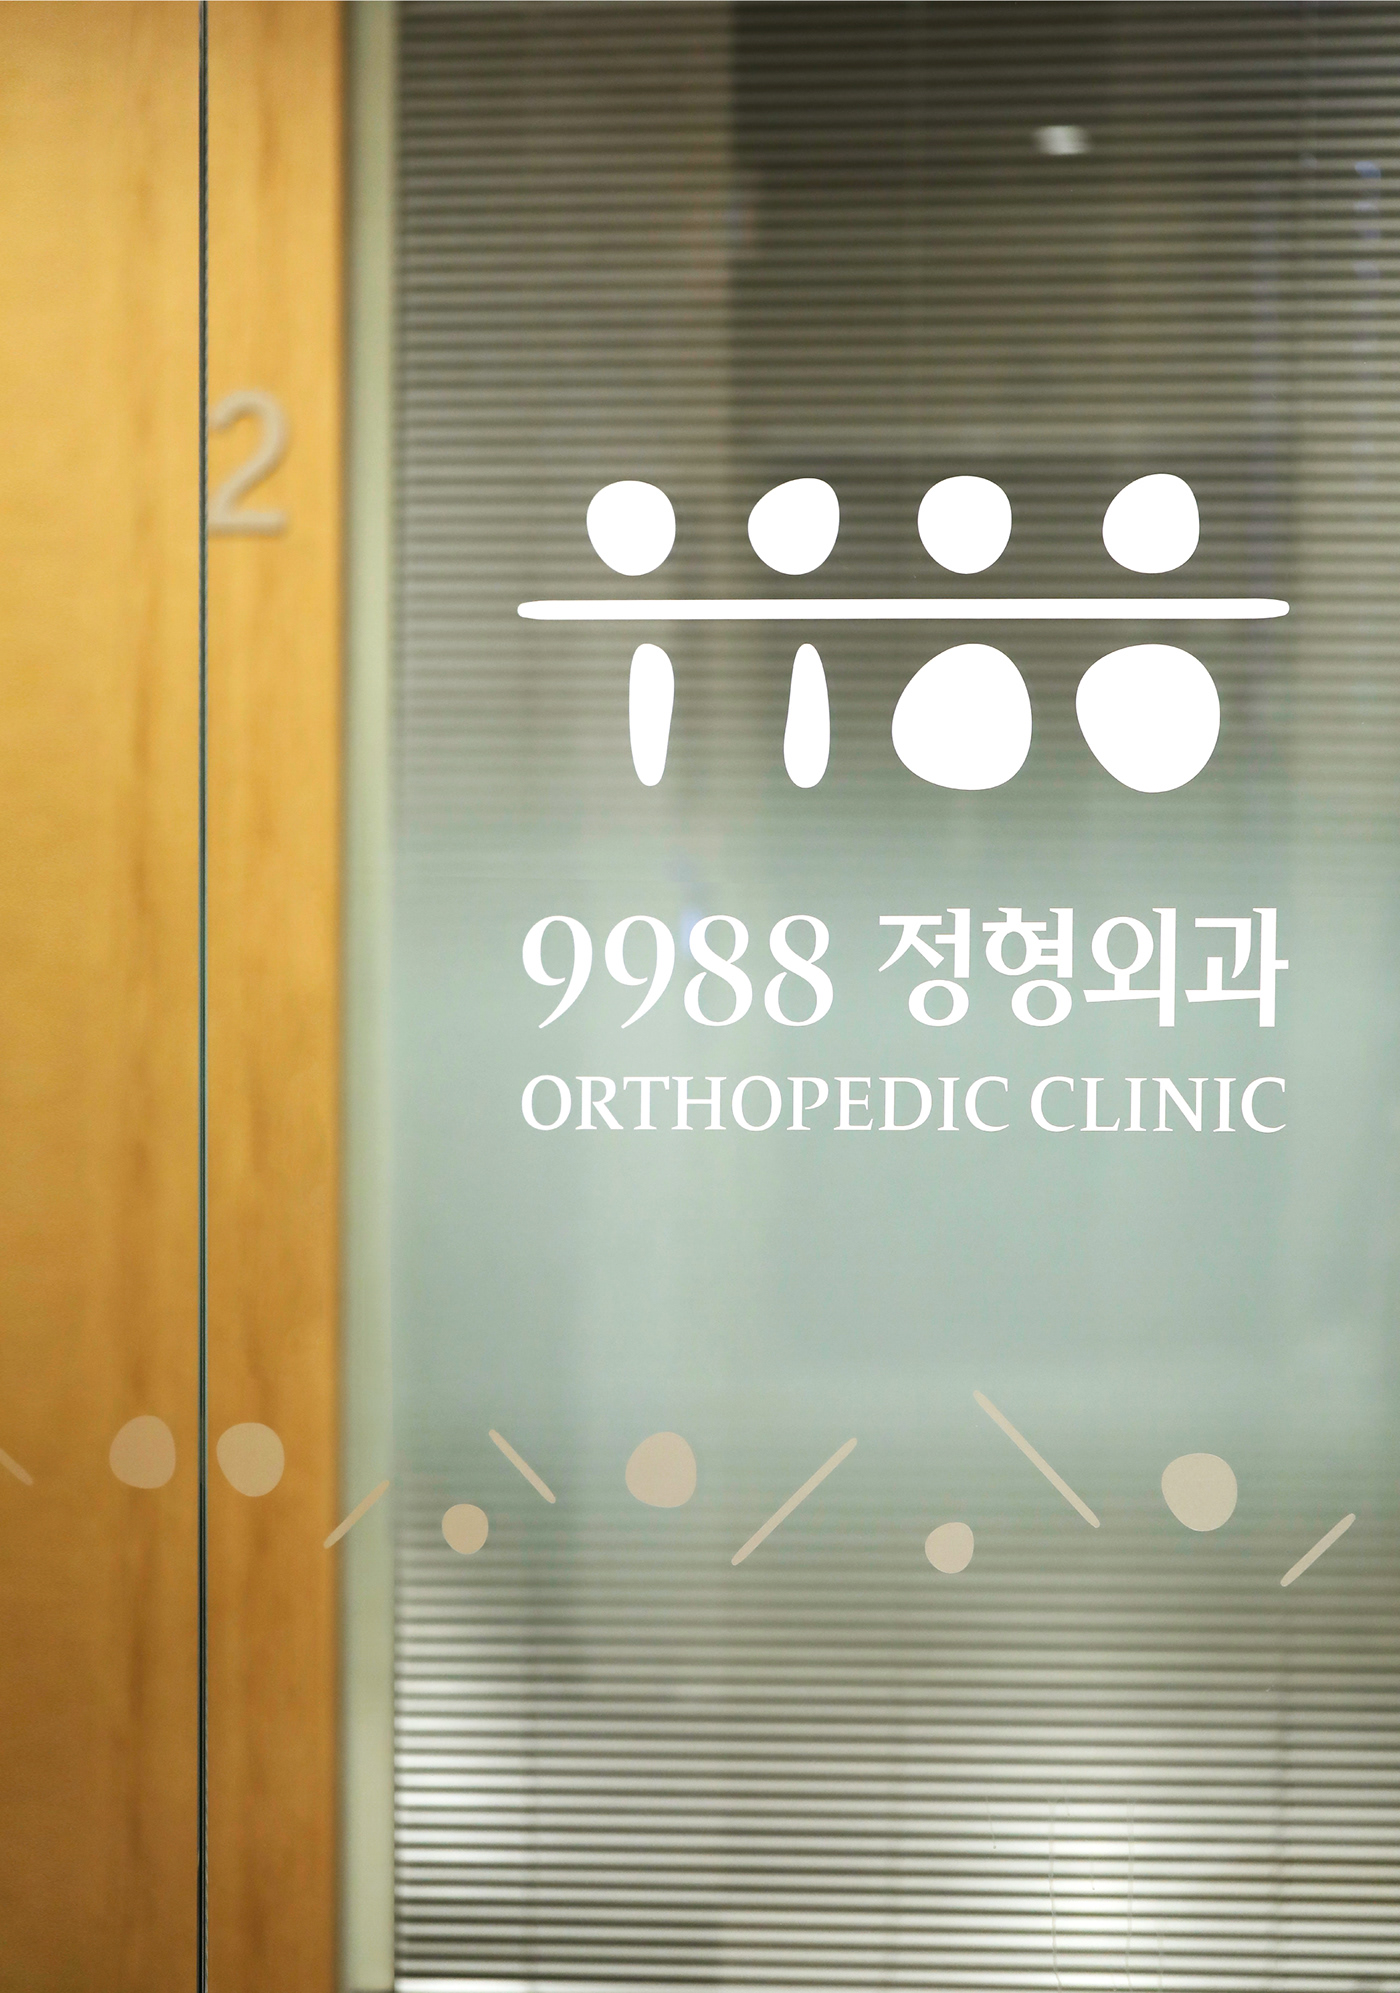 clinic Health hospital medical numbers orthopedic stone pictogram therapy Wellness